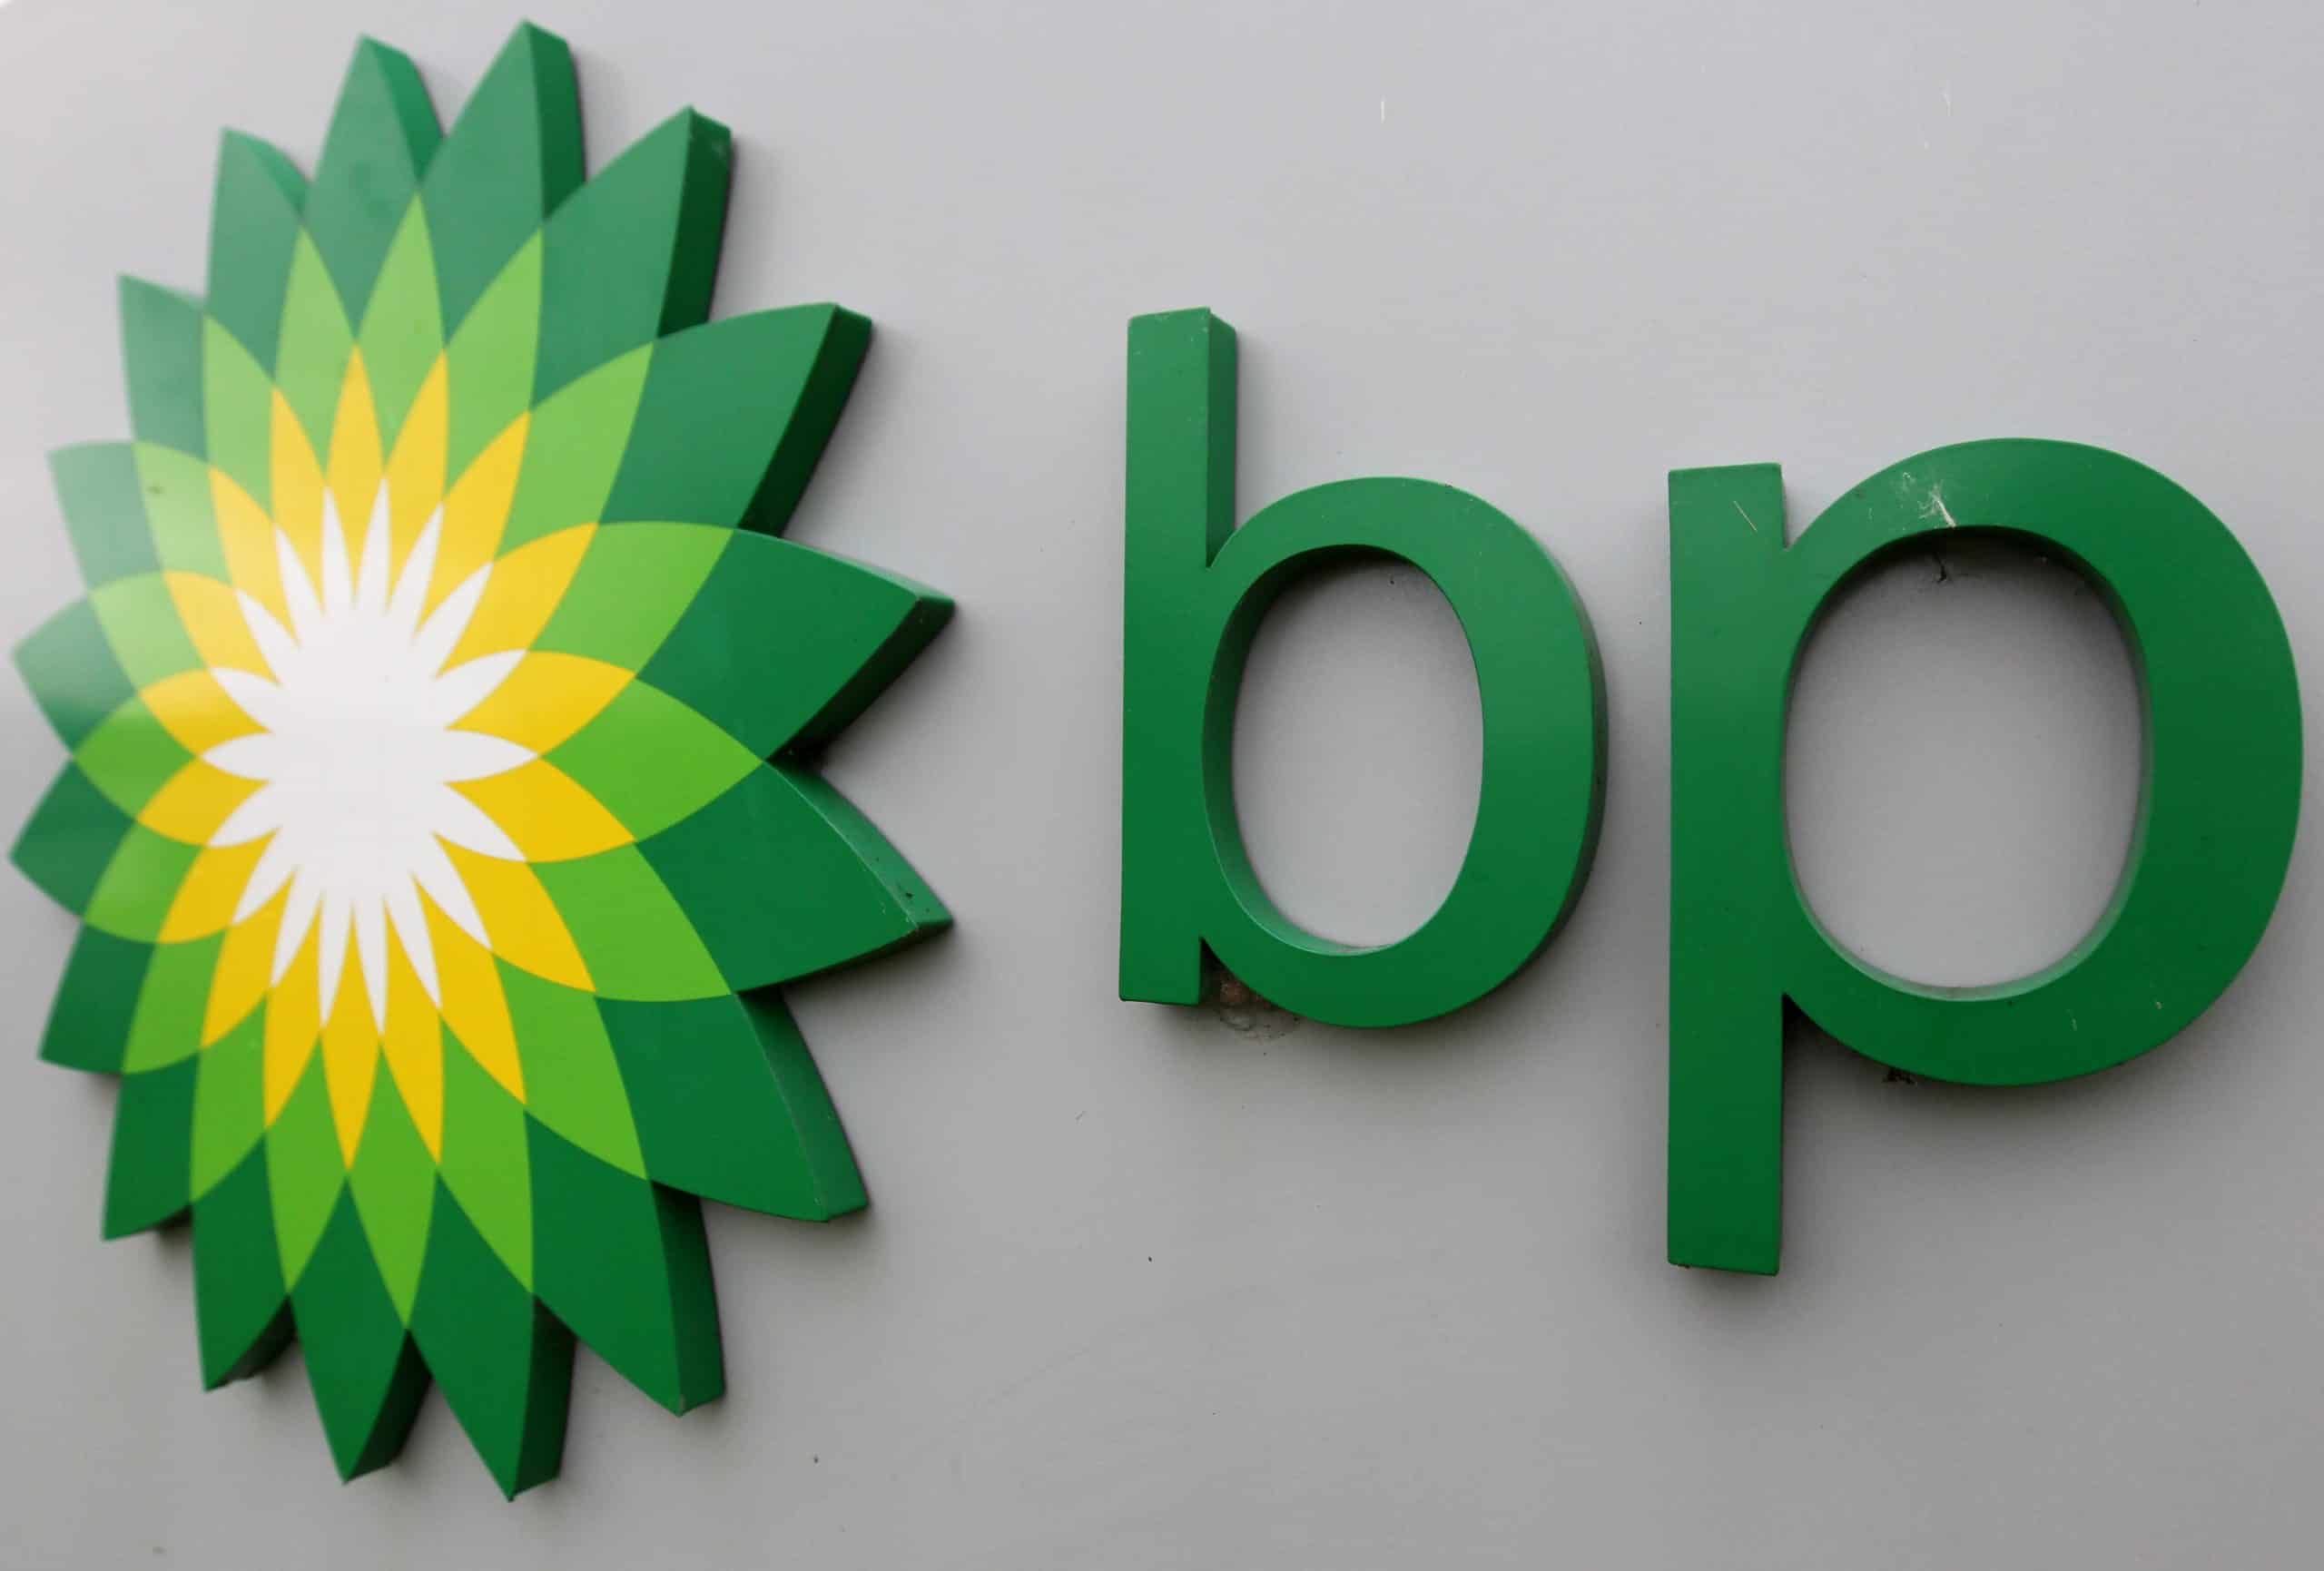 Watch: BP profits highest in over decade as Minister resists windfall tax